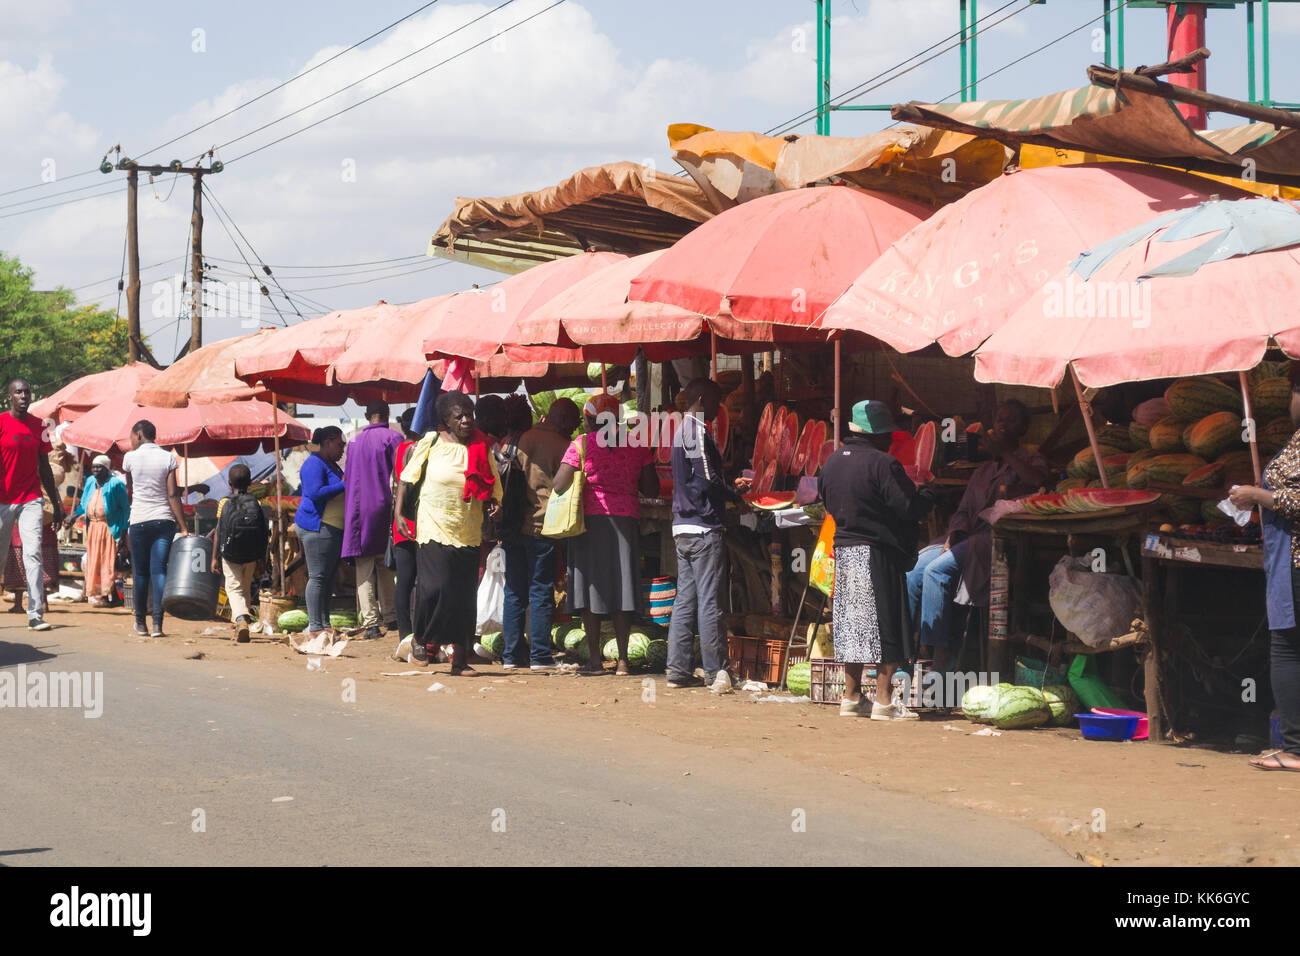 A busy roadside row of market stalls selling fruit and vegetables with people walking around, Kenya, East Africa Stock Photo